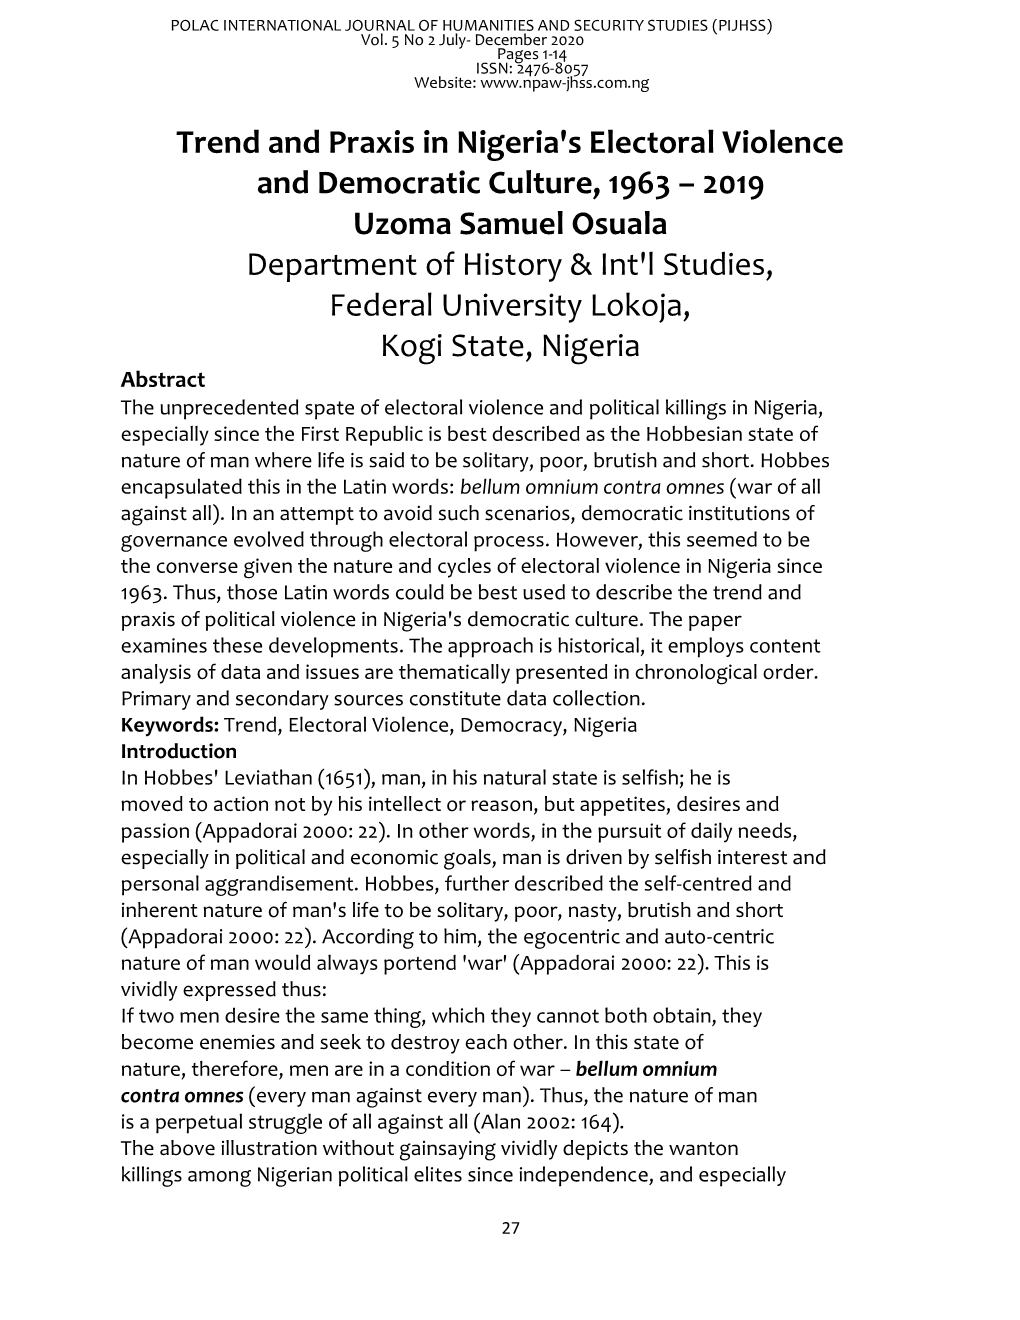 Trend and Praxis in Nigeria's Electoral Violence and Democratic Culture